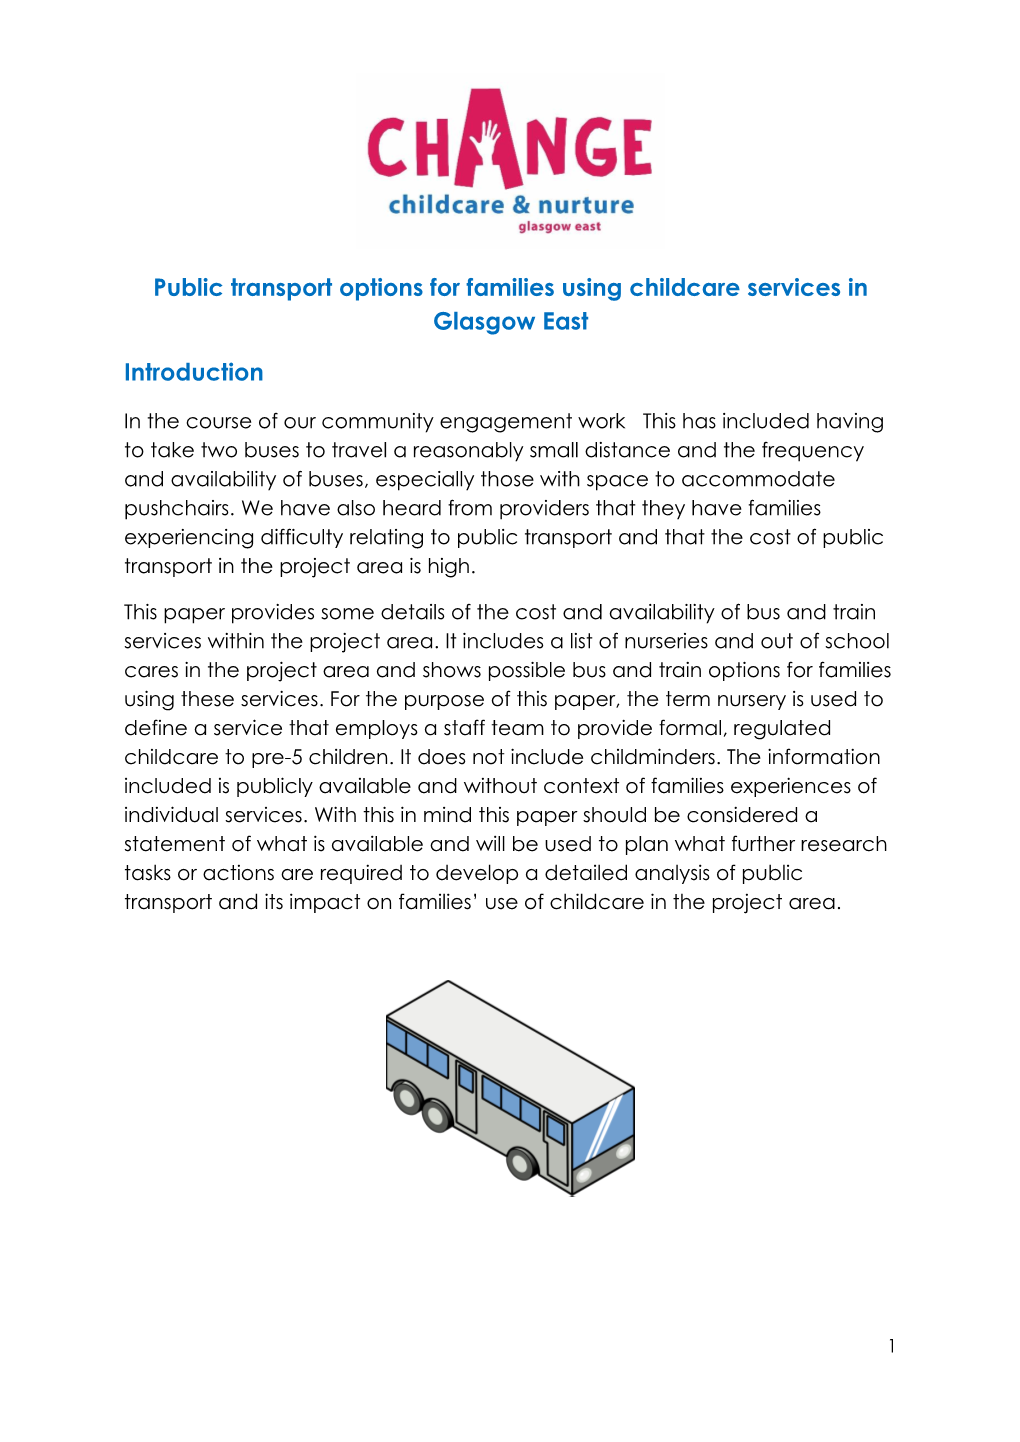 Public Transport Options for Families Using Childcare Services in Glasgow East